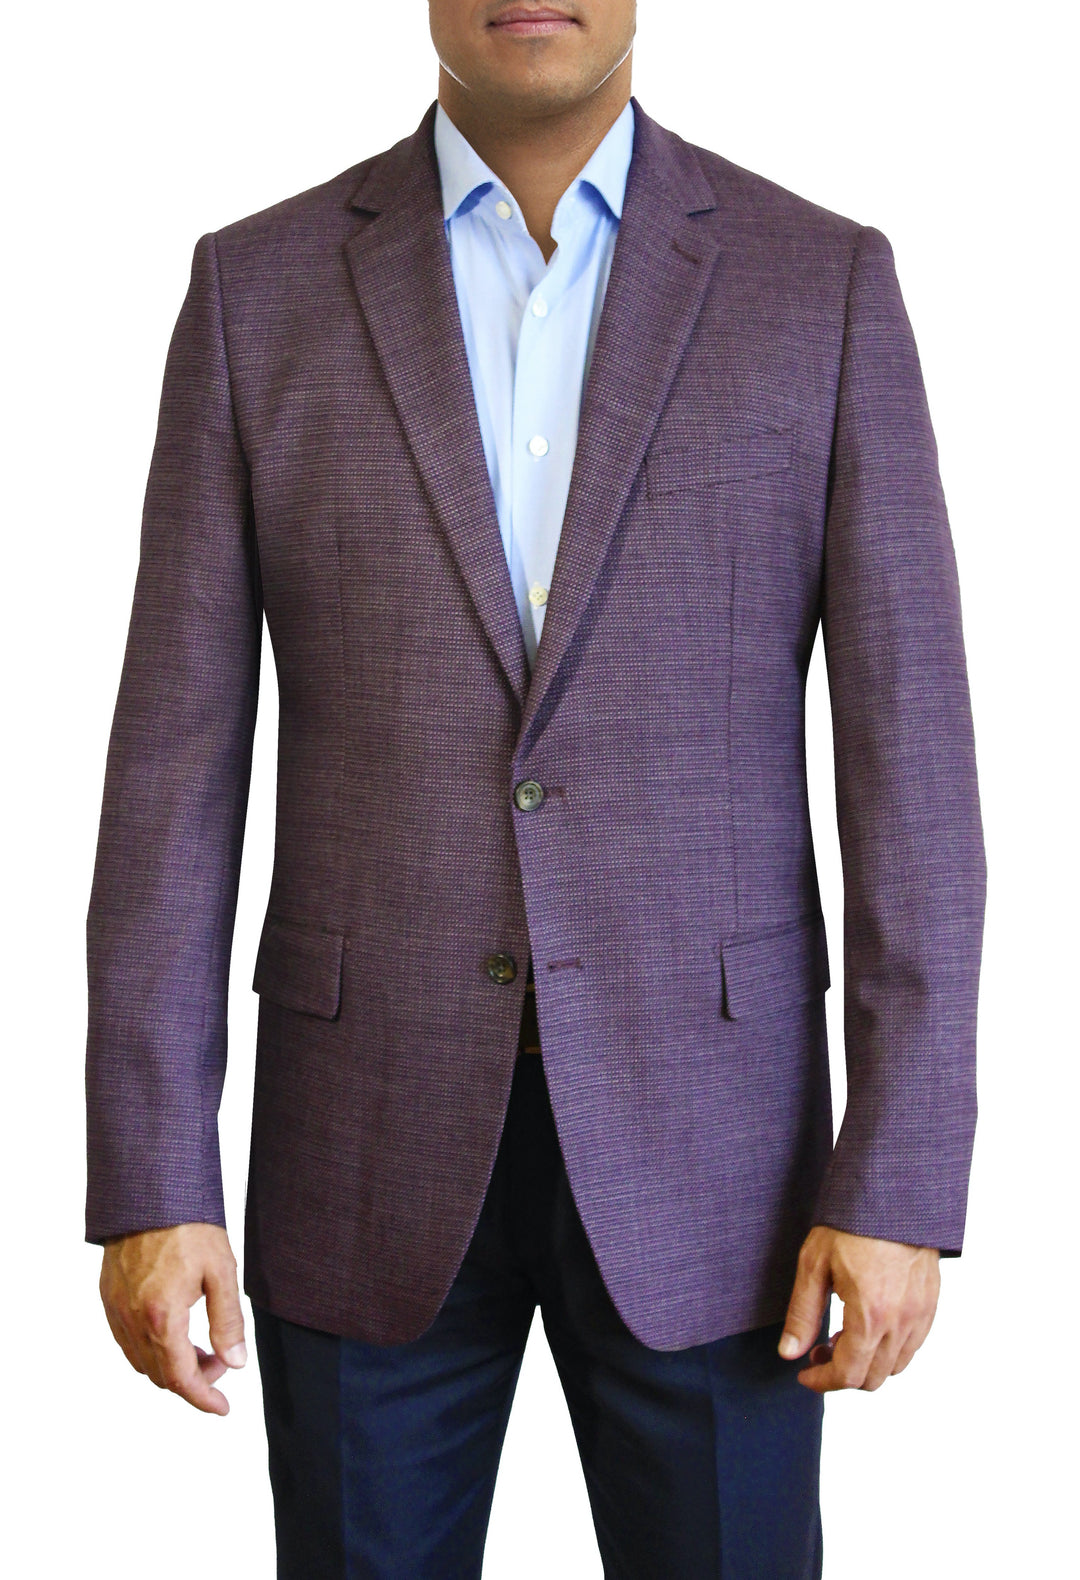 Maroon Textured Solid two button jacket by Daniel Hechter